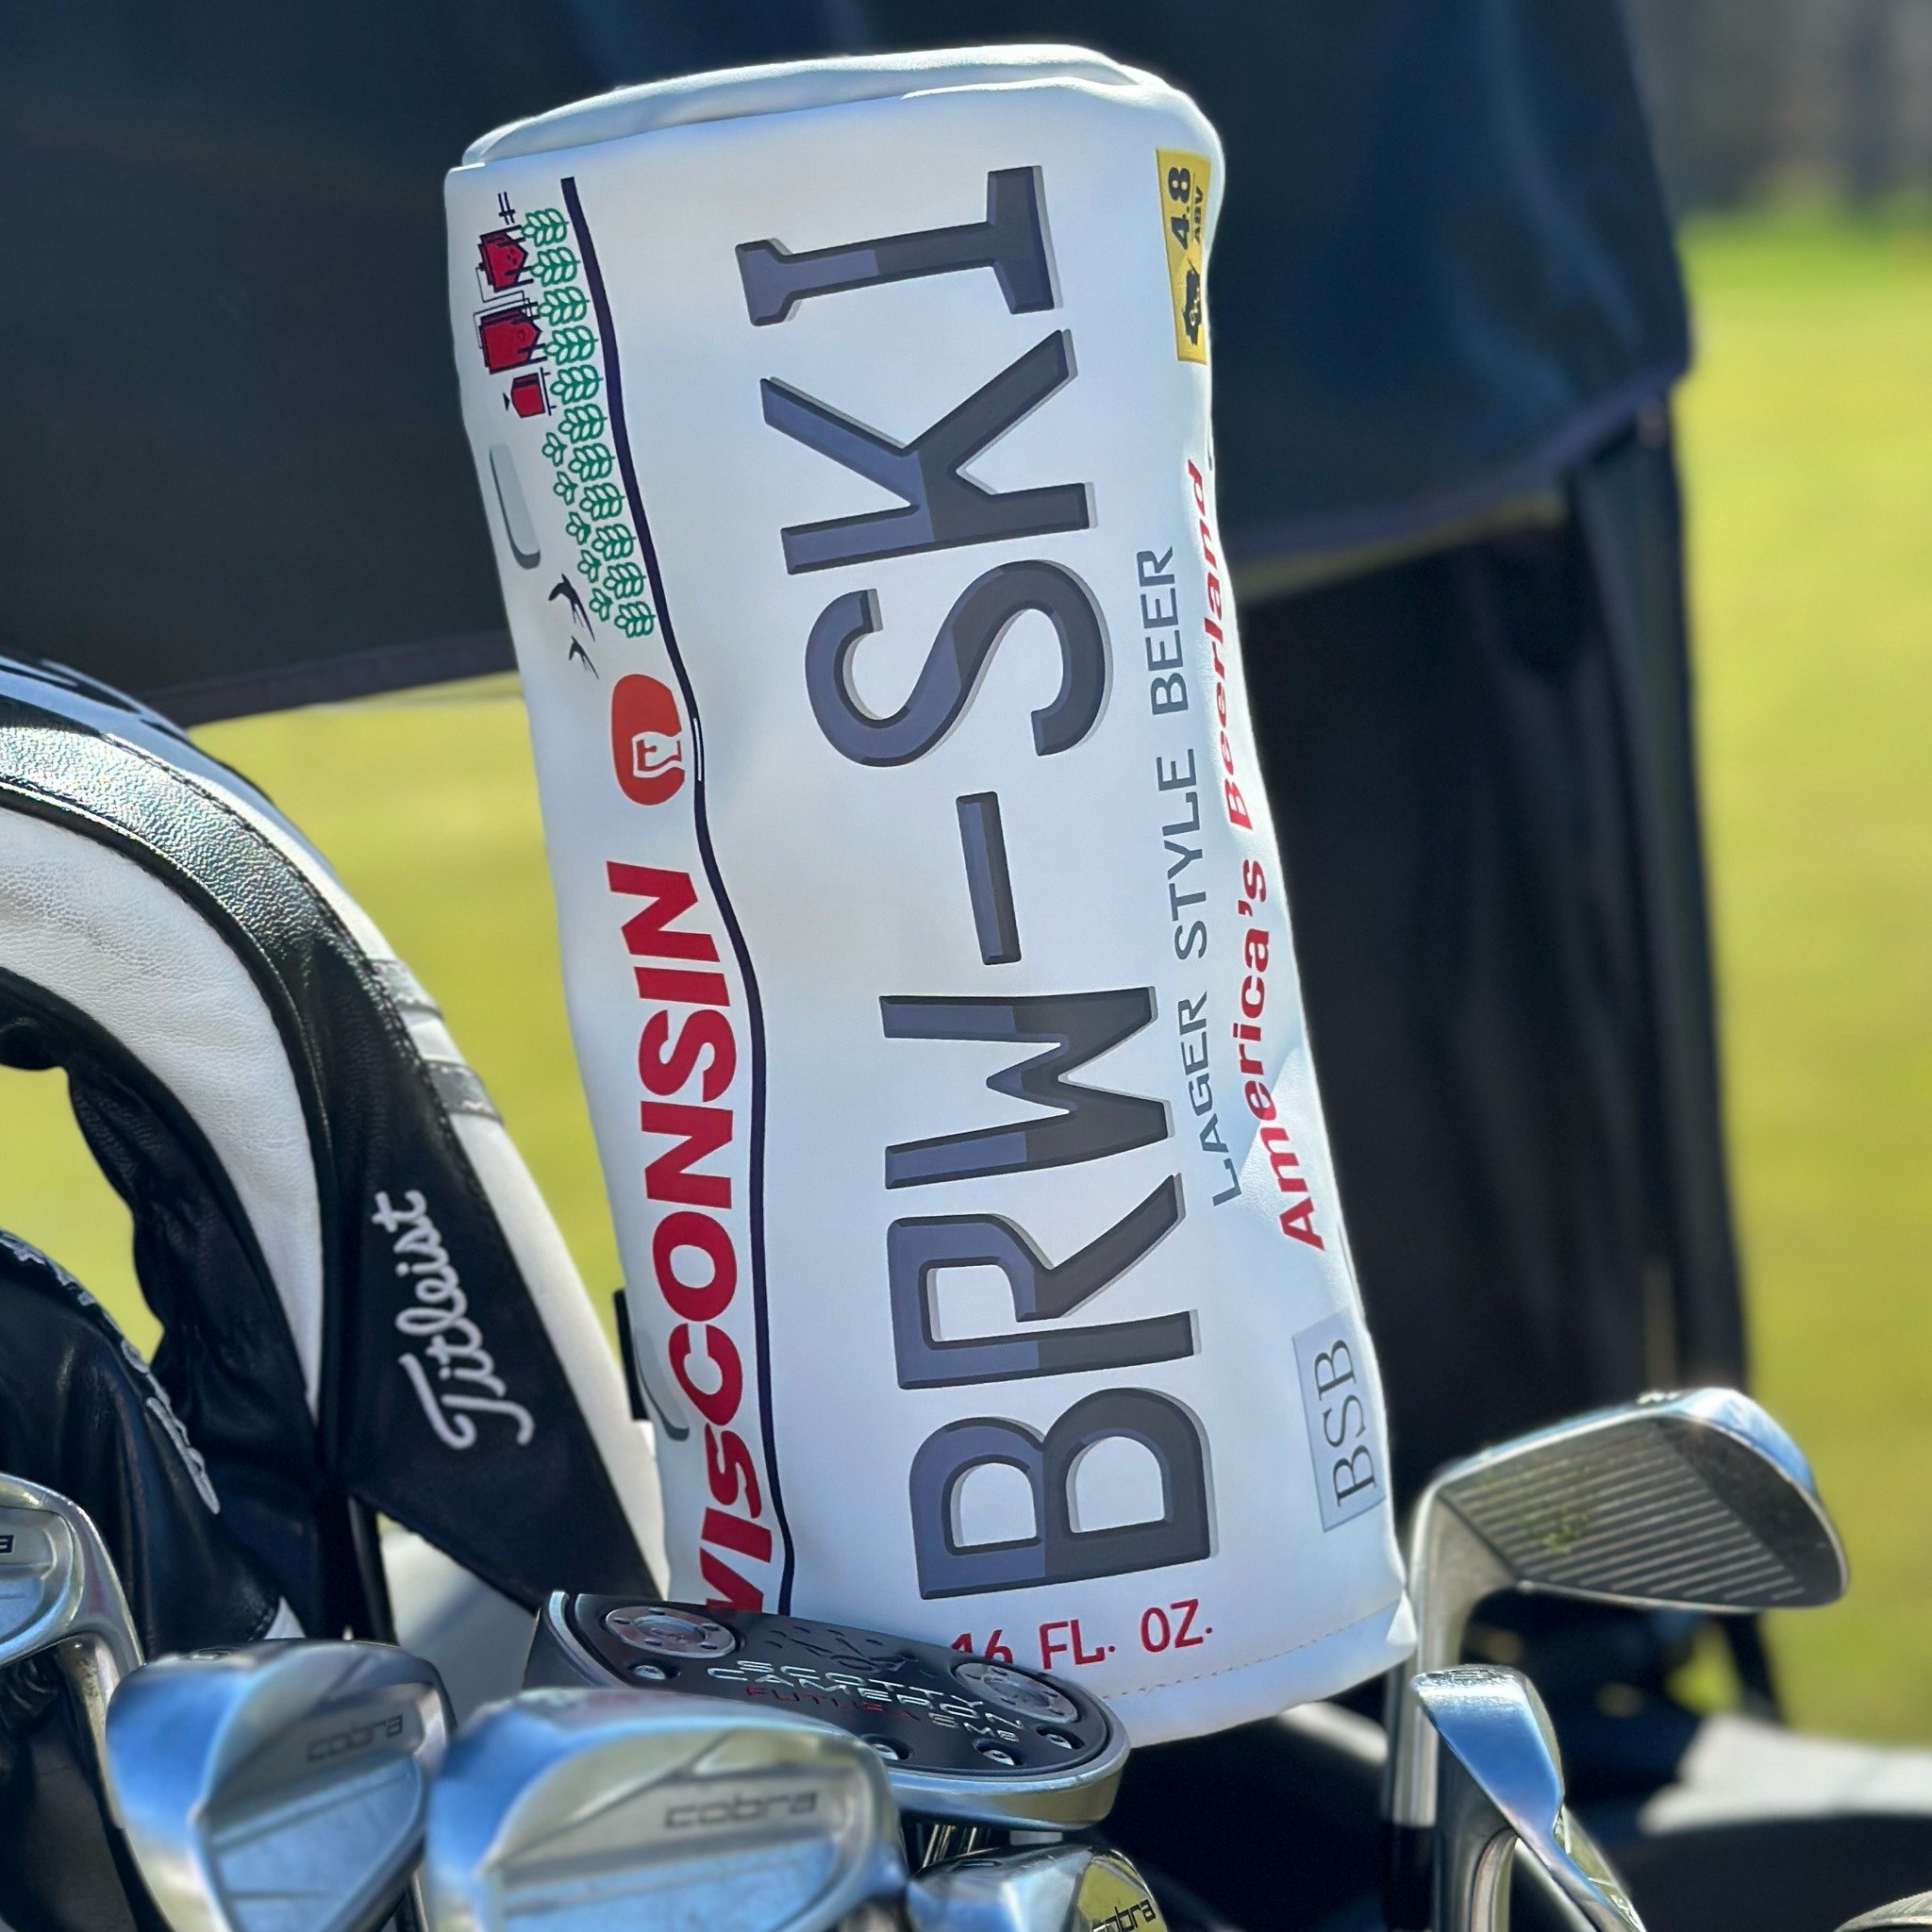 Not only the headcover we wanted but the headcover we needed is finally here. The greatest can in all Wisconsin deserves a spot in your golf bag this season&hellip;